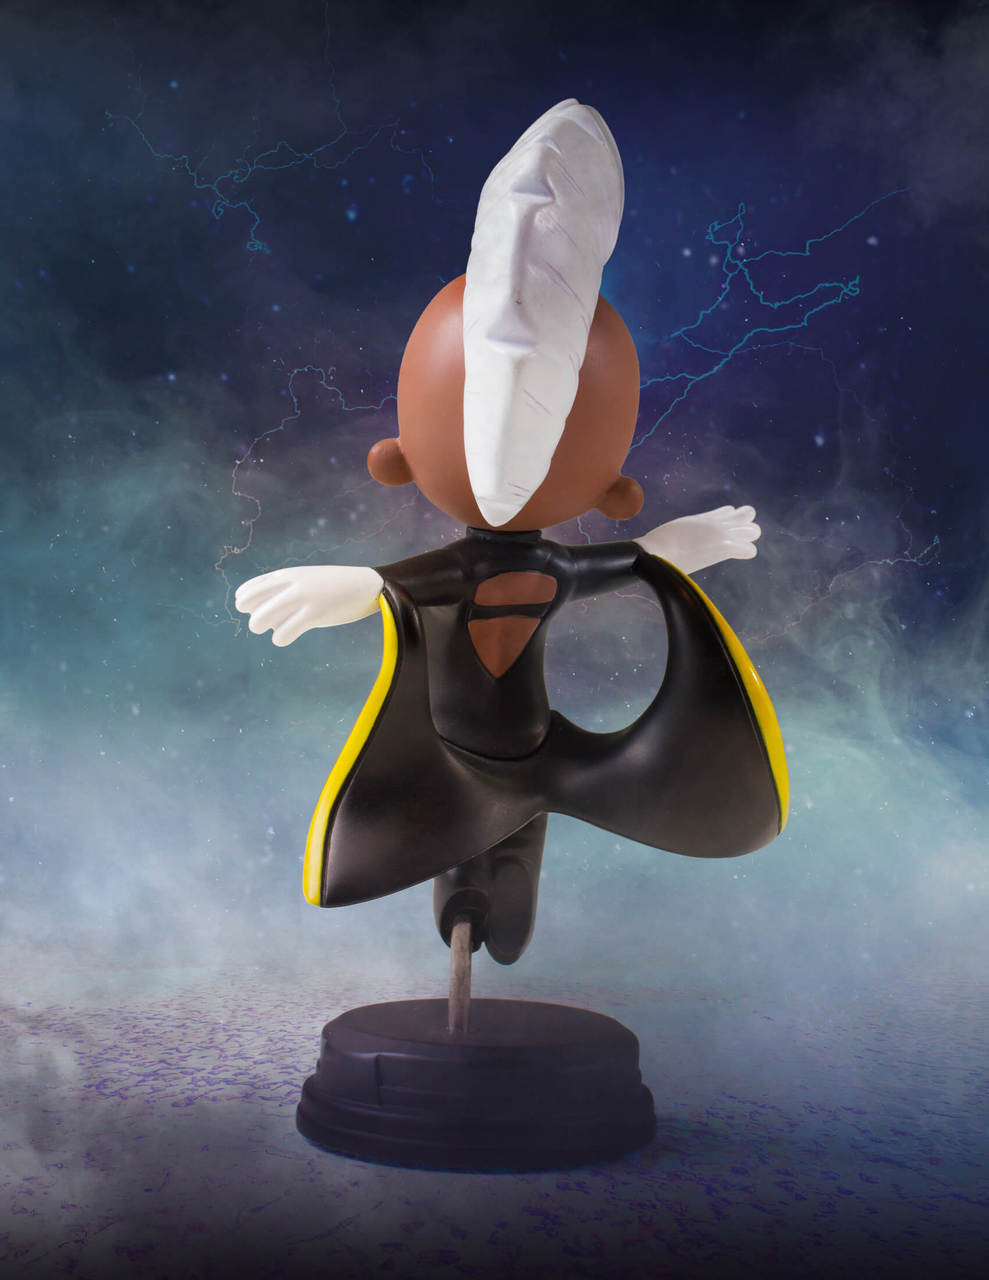 Storm is the Latest Marvel Animated Statue From Gentle Giant